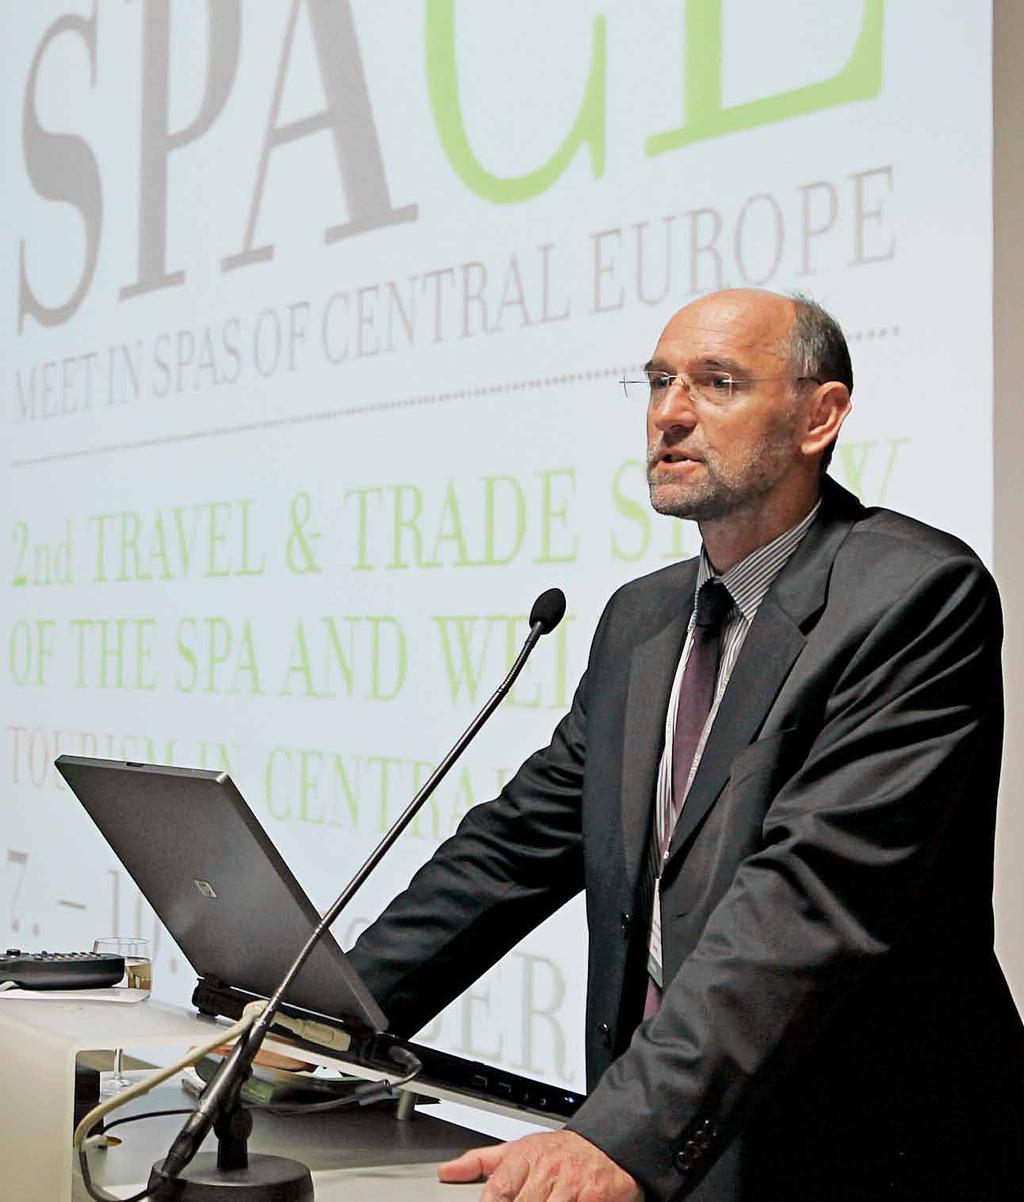 Iztok Altbauer, the Director of the Slovenian Spas Association Water, mud, brine, peat and